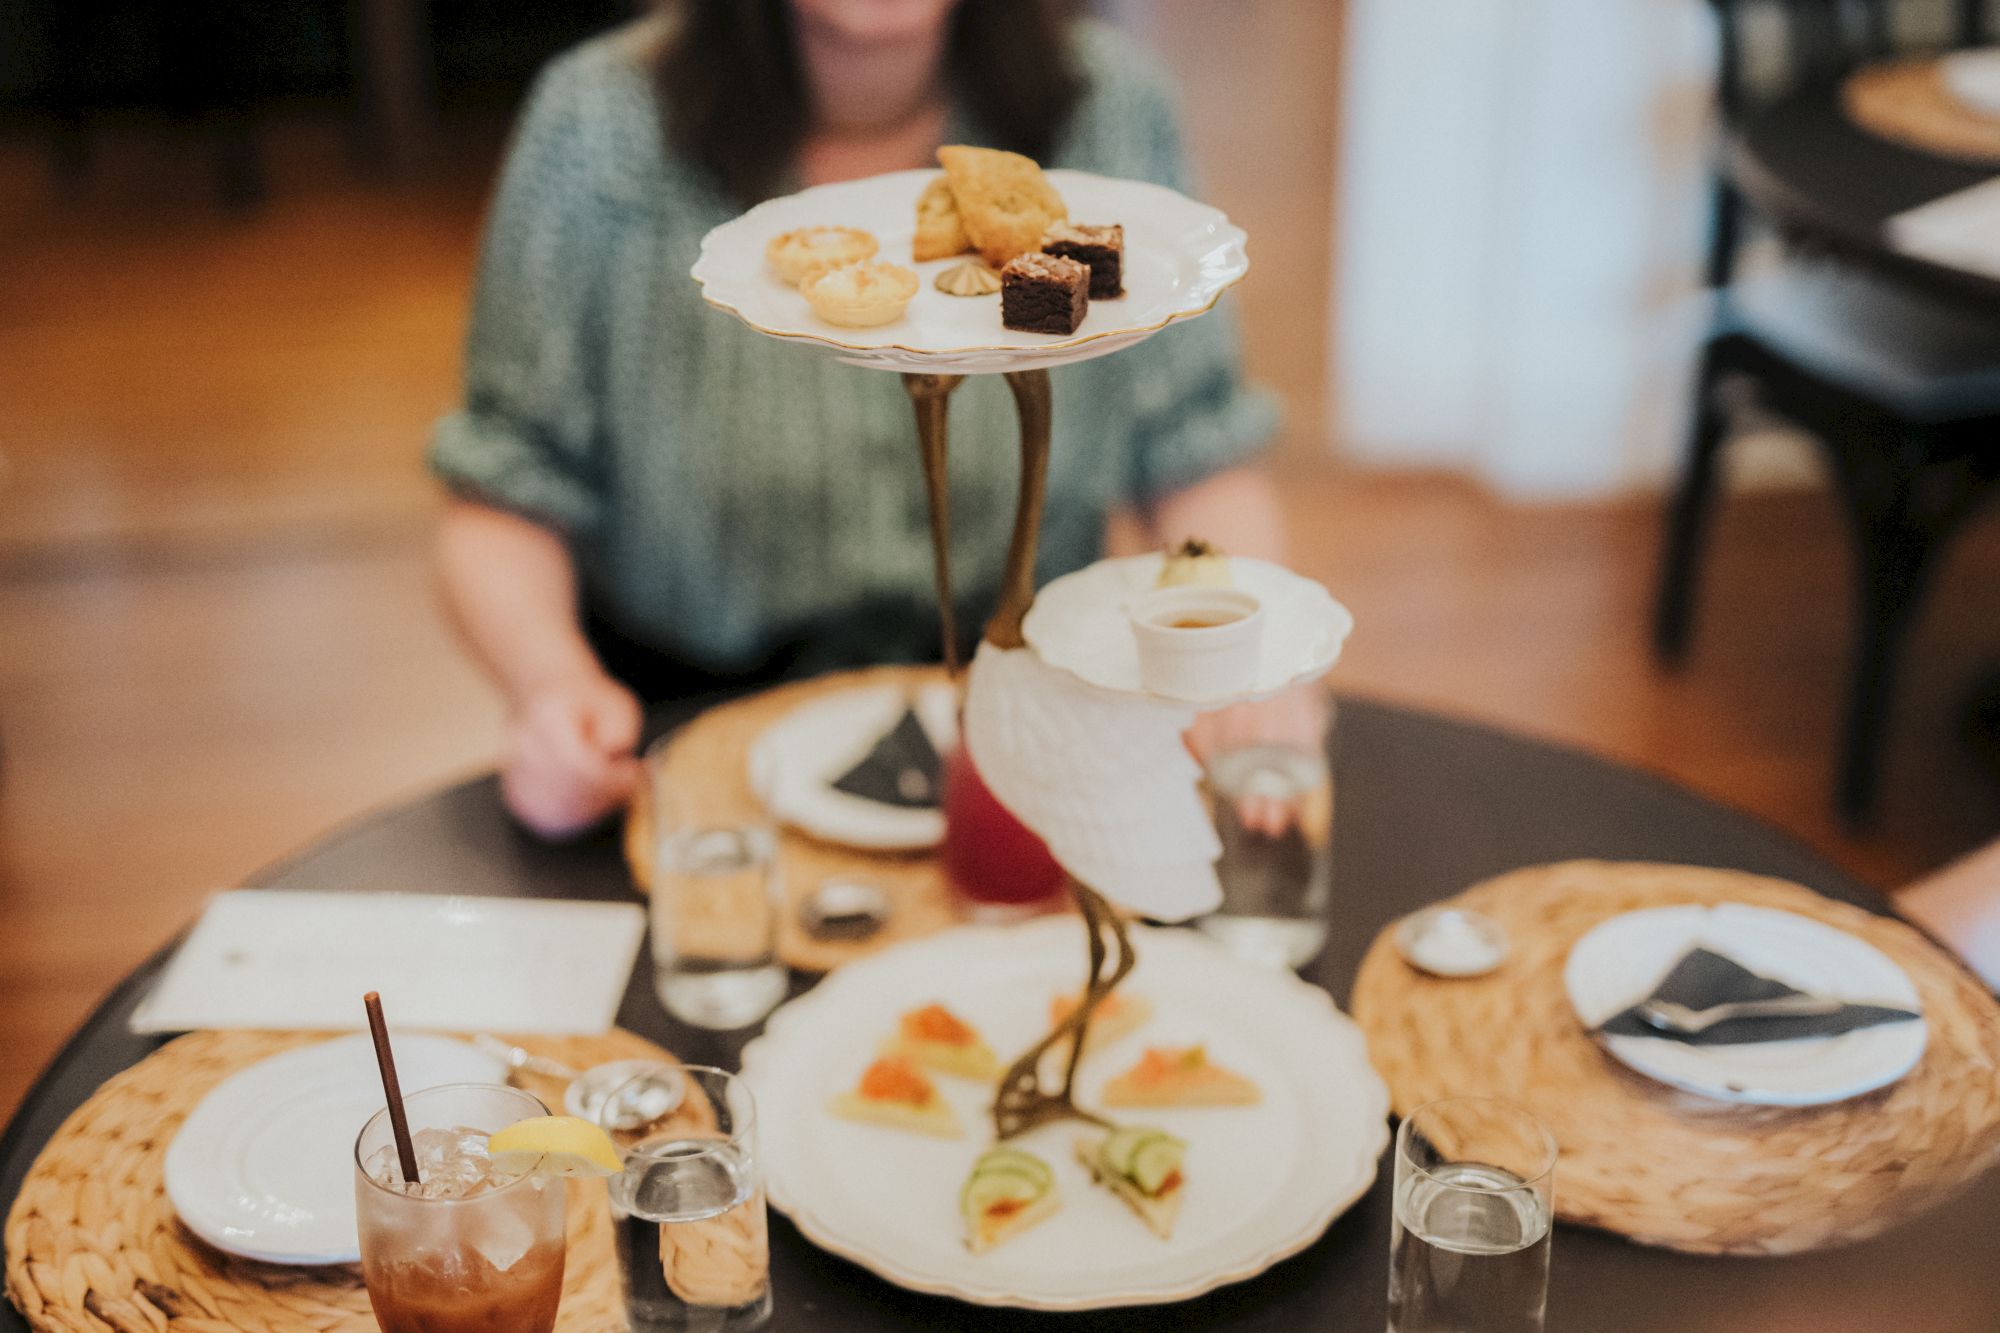 A table set for high tea with tiered trays of pastries and sandwiches, two glasses, and beverages, with a person blurred in the background.